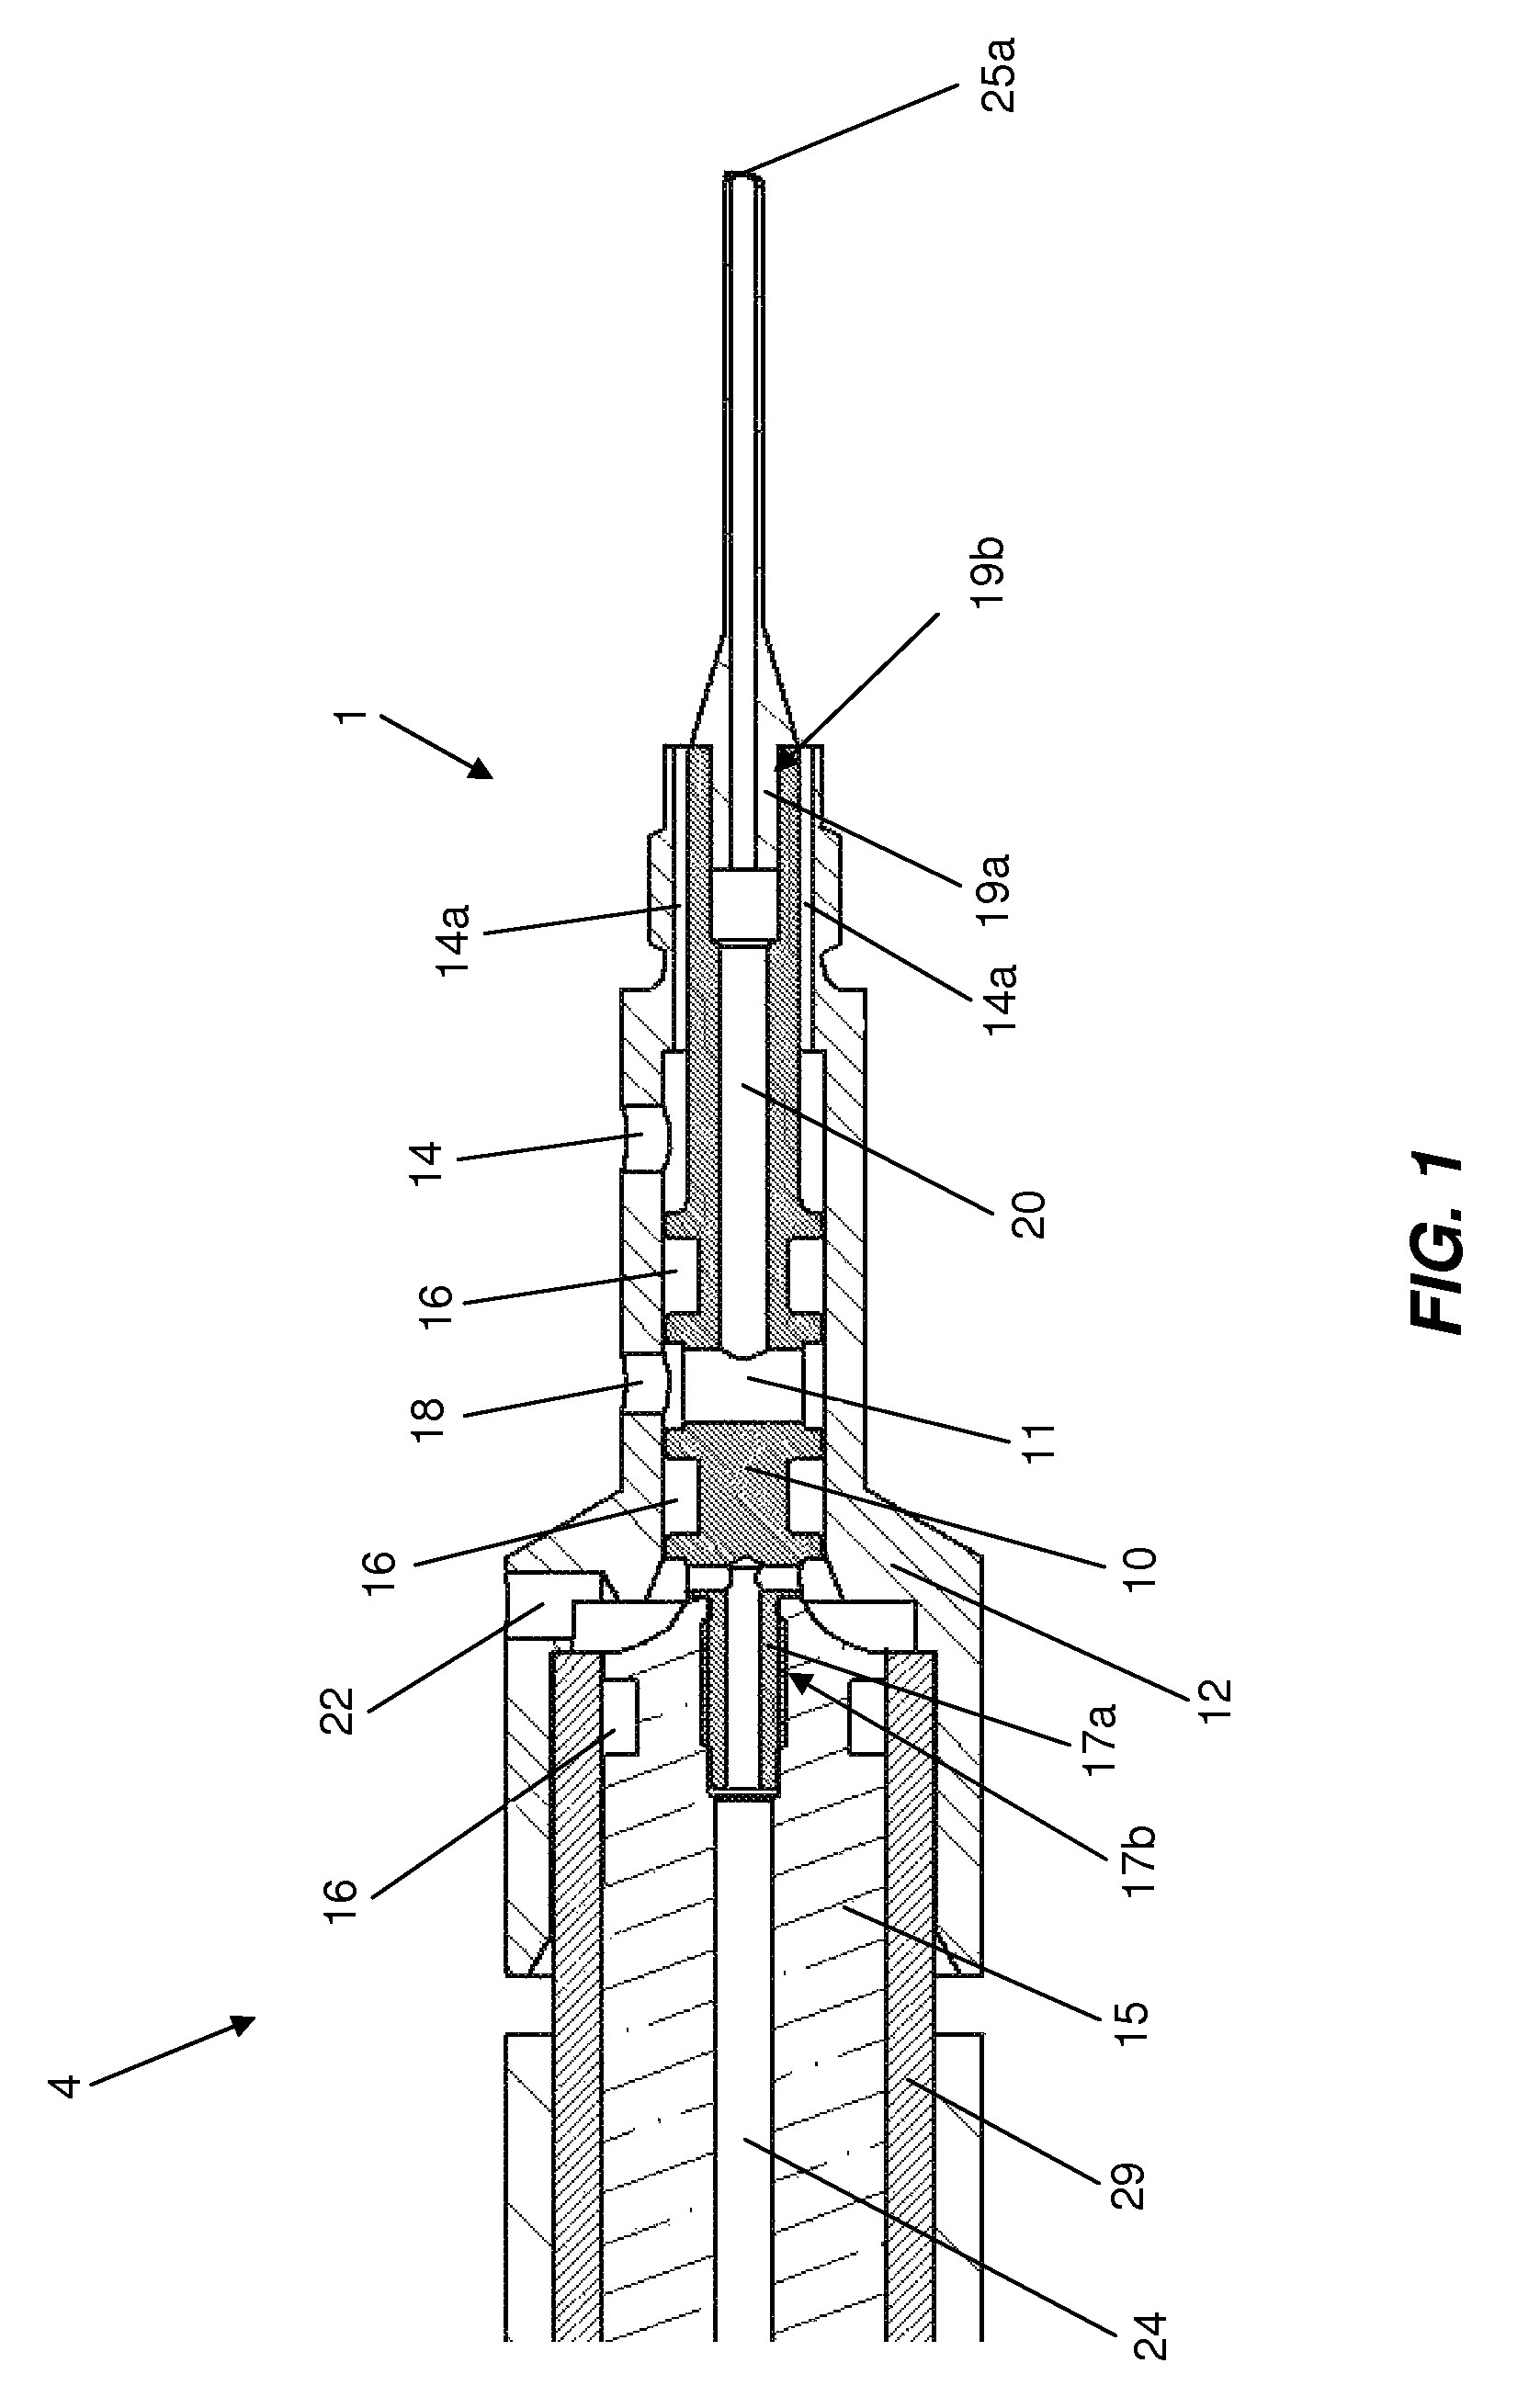 Removable adapter for phacoemulsification handpiece having irrigation and aspiration fluid paths